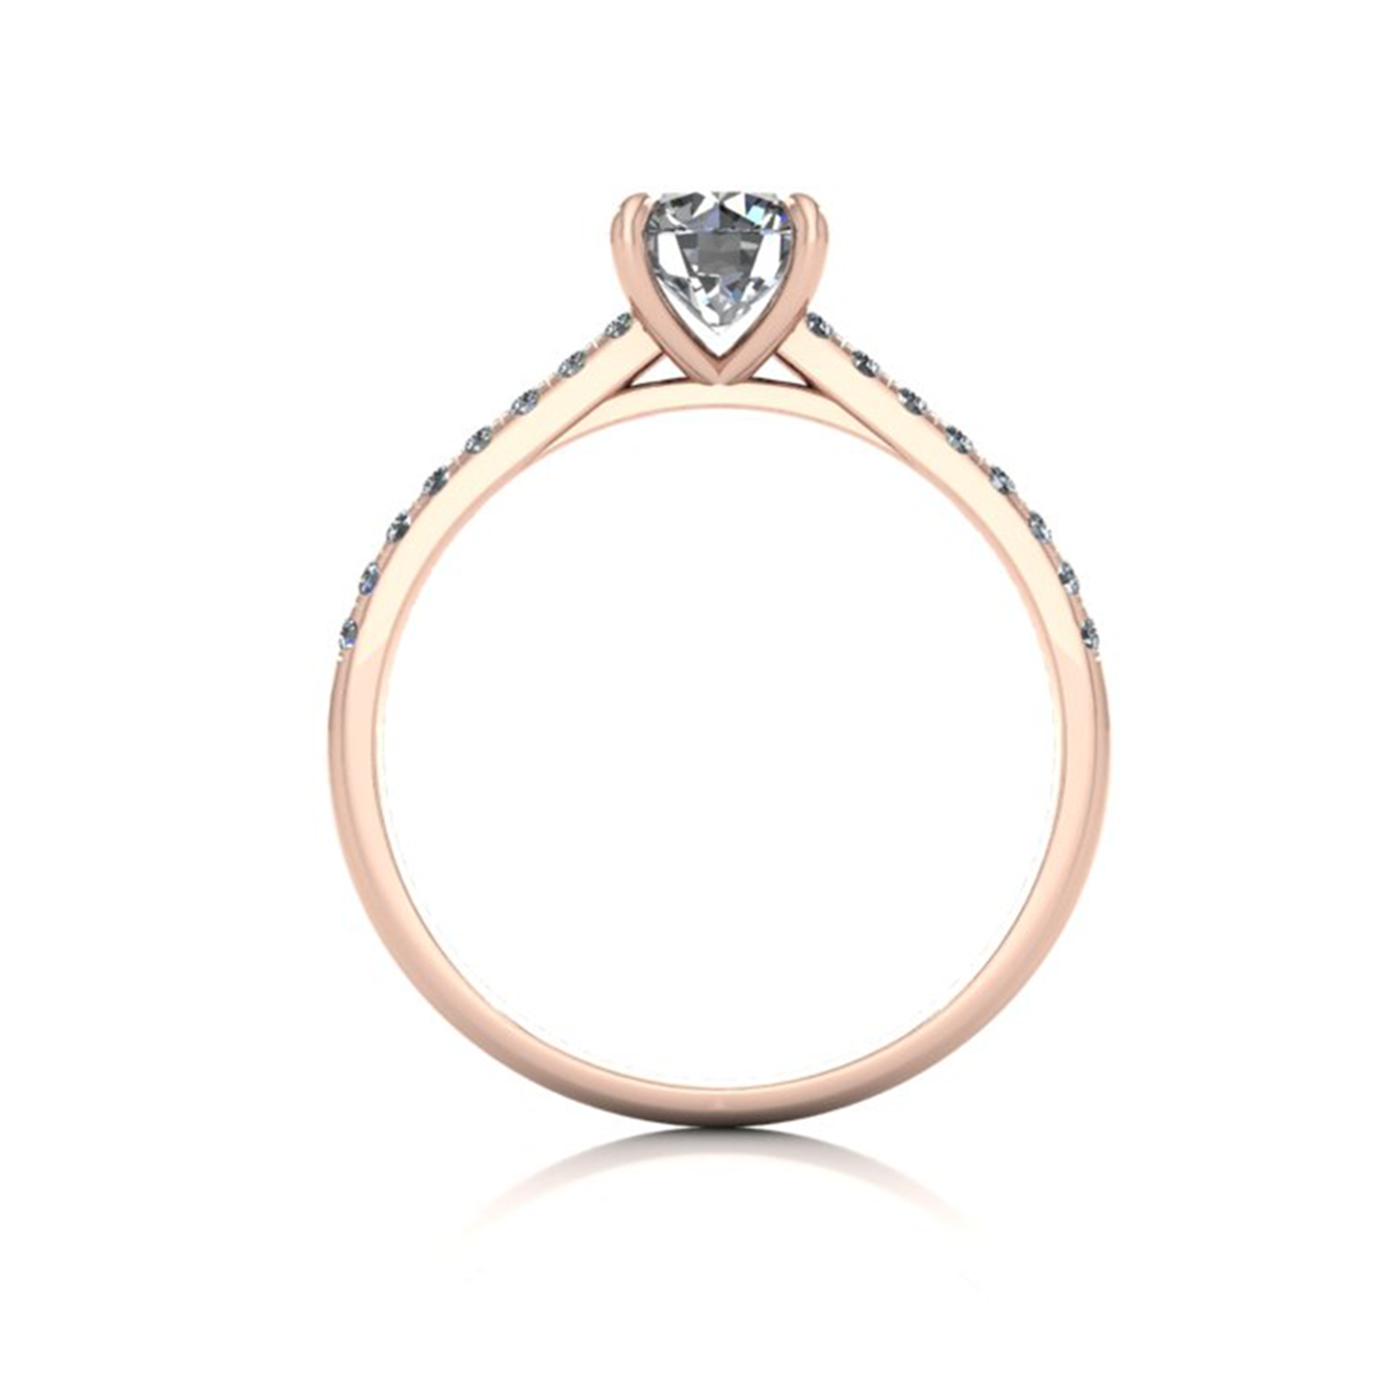 18k rose gold 0,80 ct 4 prongs round cut diamond engagement ring with whisper thin pavÉ set band